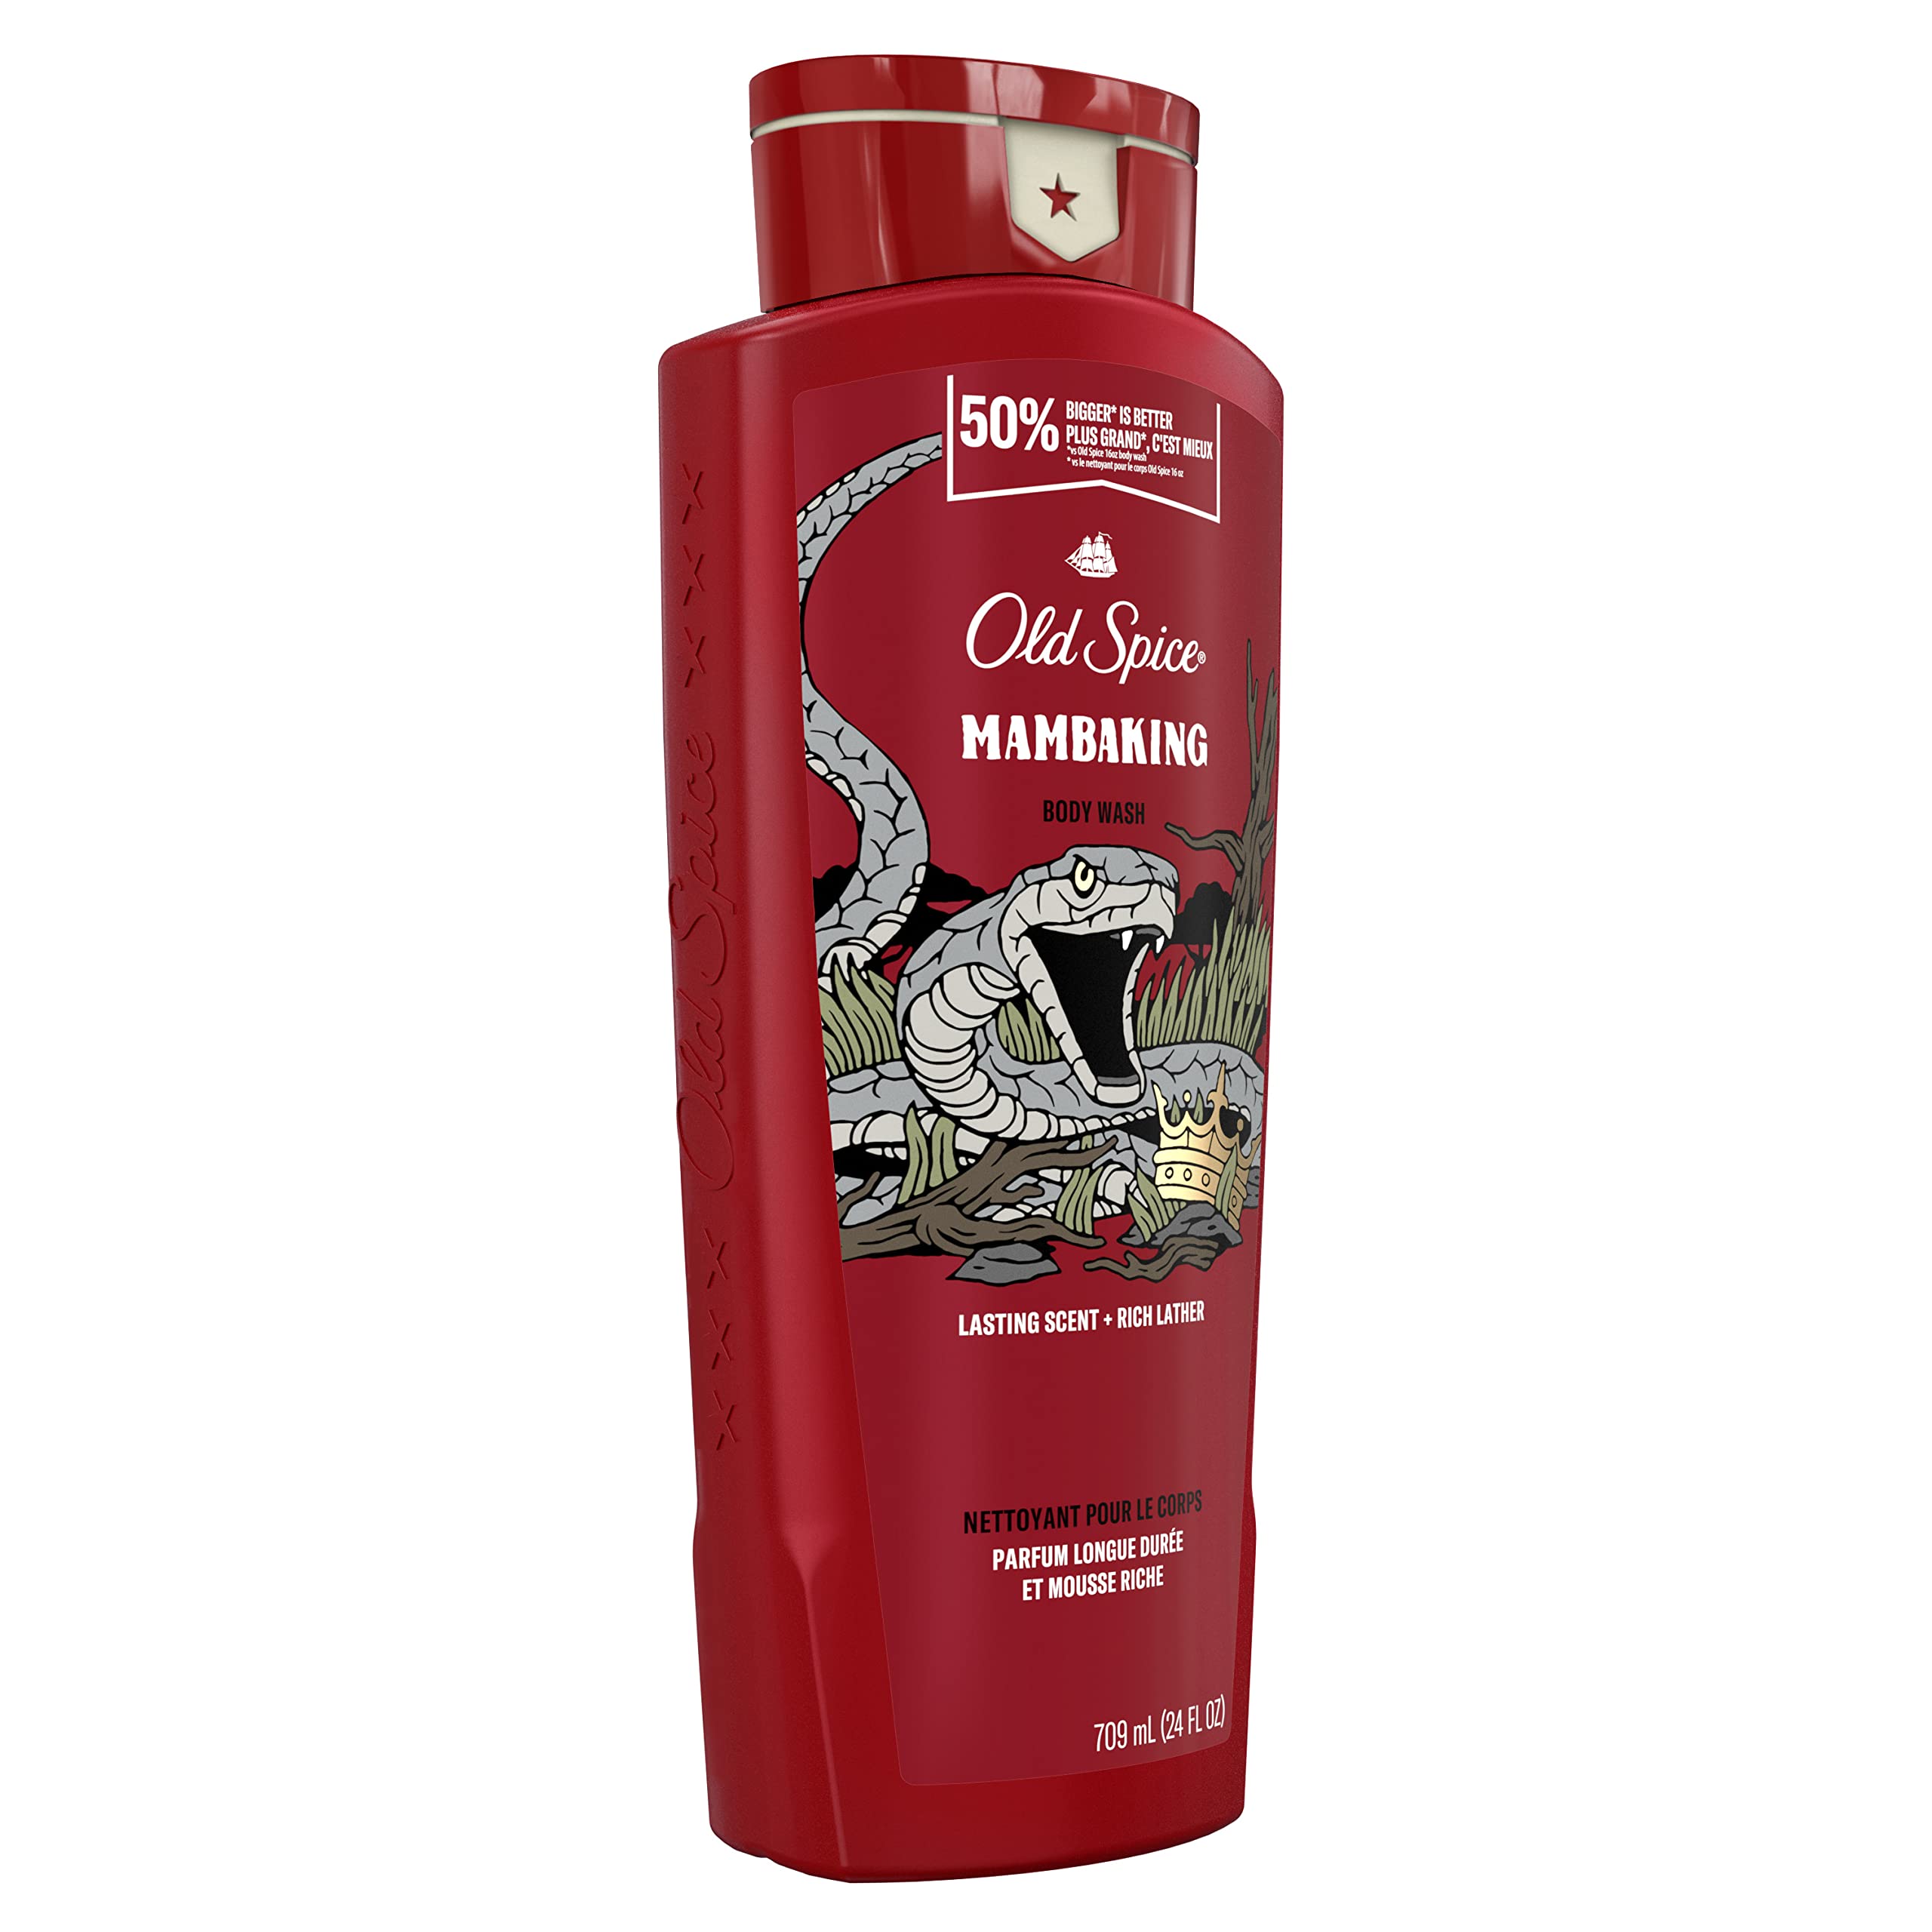 Old Spice Body Wash for Men, MambaKing, 24 oz